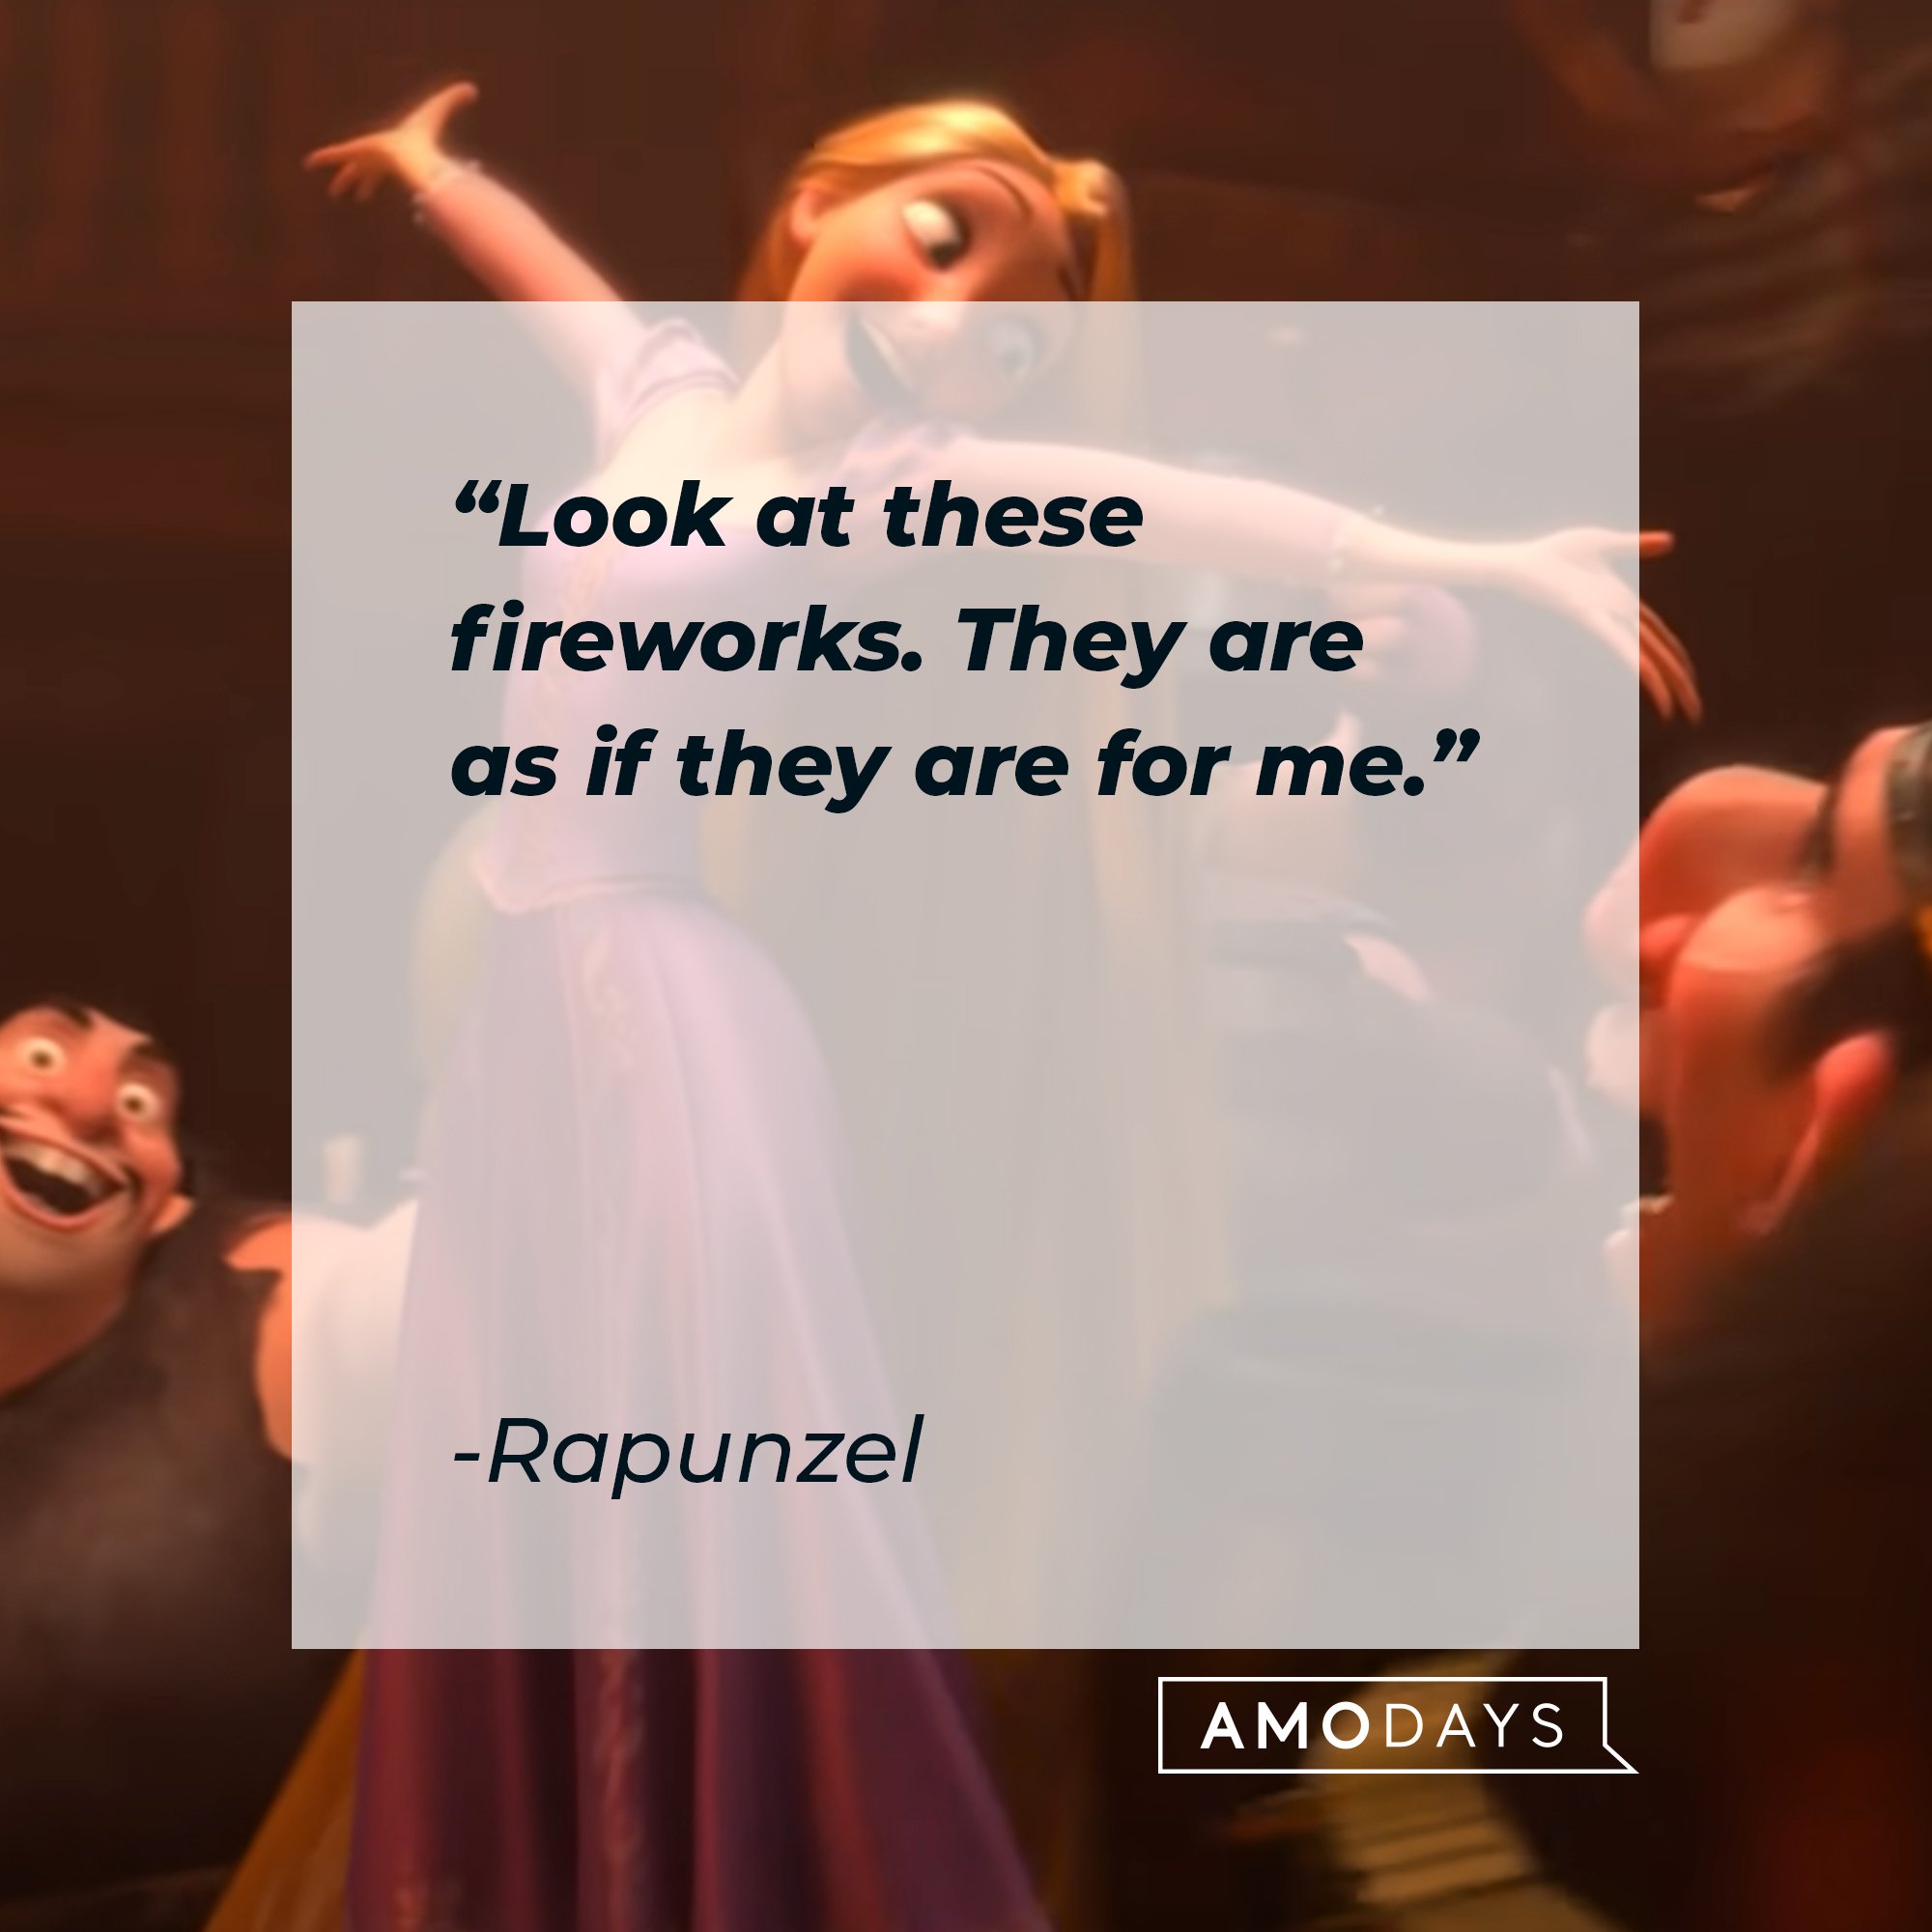 Rapunzel's quote: "Look at these fireworks. They are as if they are for me." | Image: AmoDays